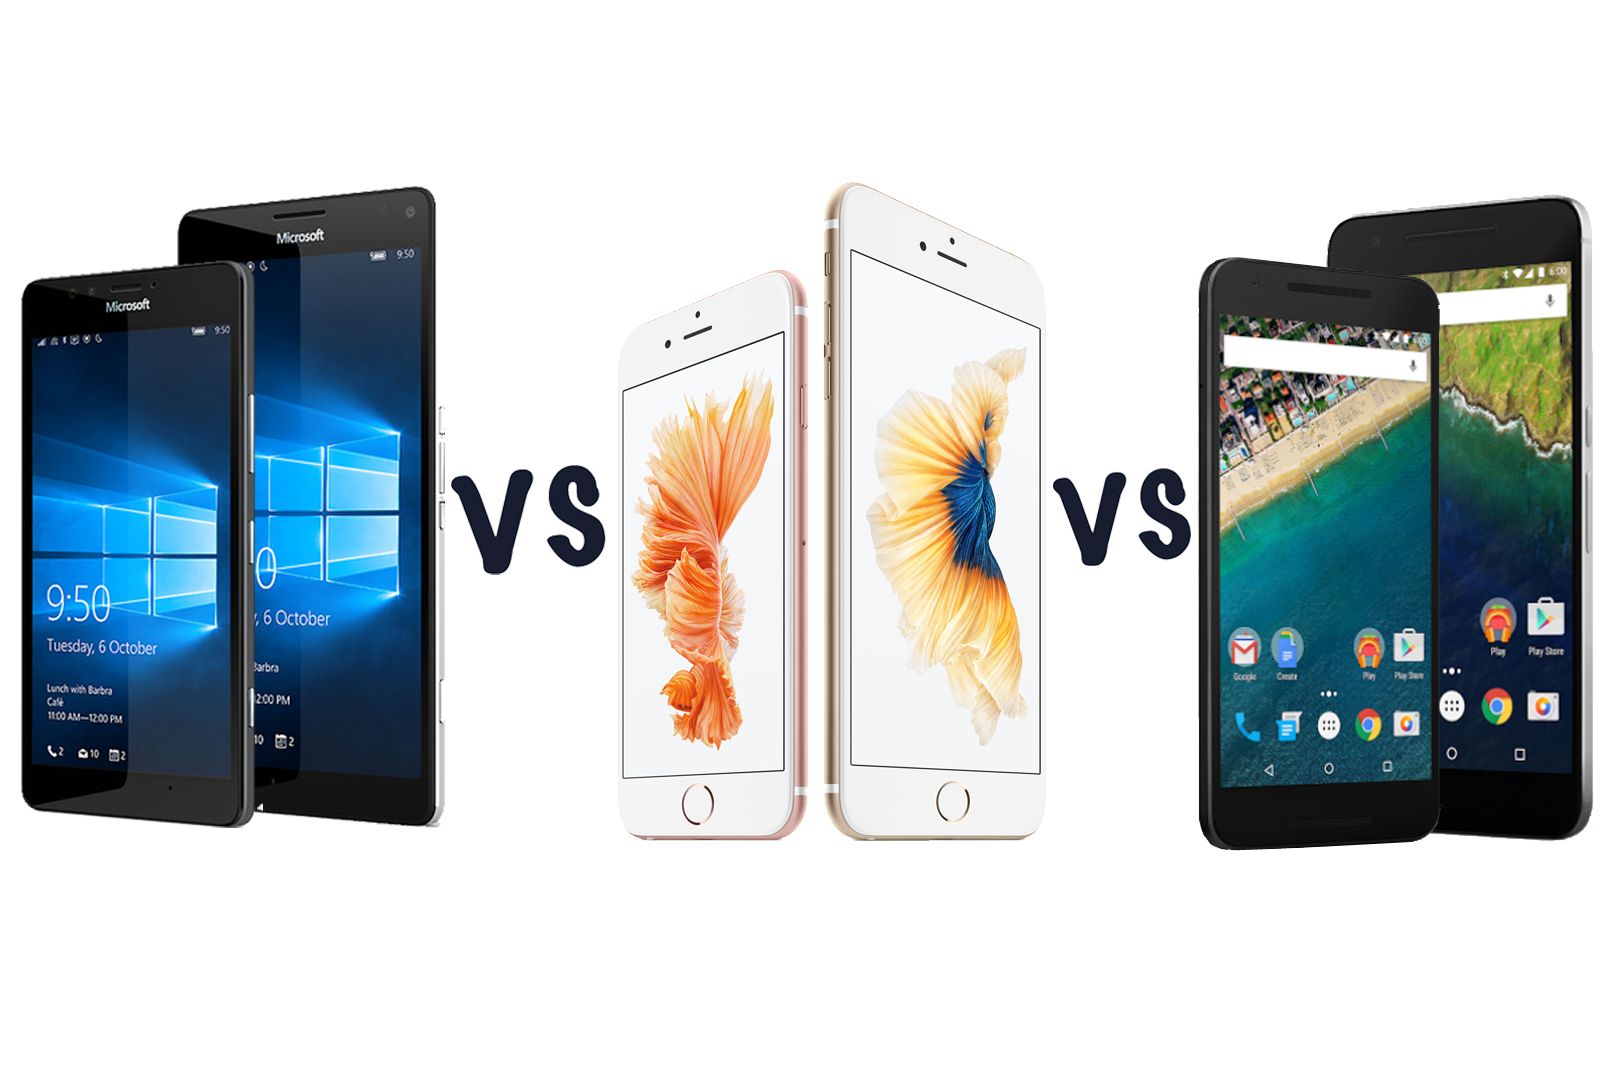 microsoft lumia 950 lumia 950 xl vs apple iphone 6s iphone 6s plus vs google nexus 5x nexus 6p what s the difference between the flagships  image 1